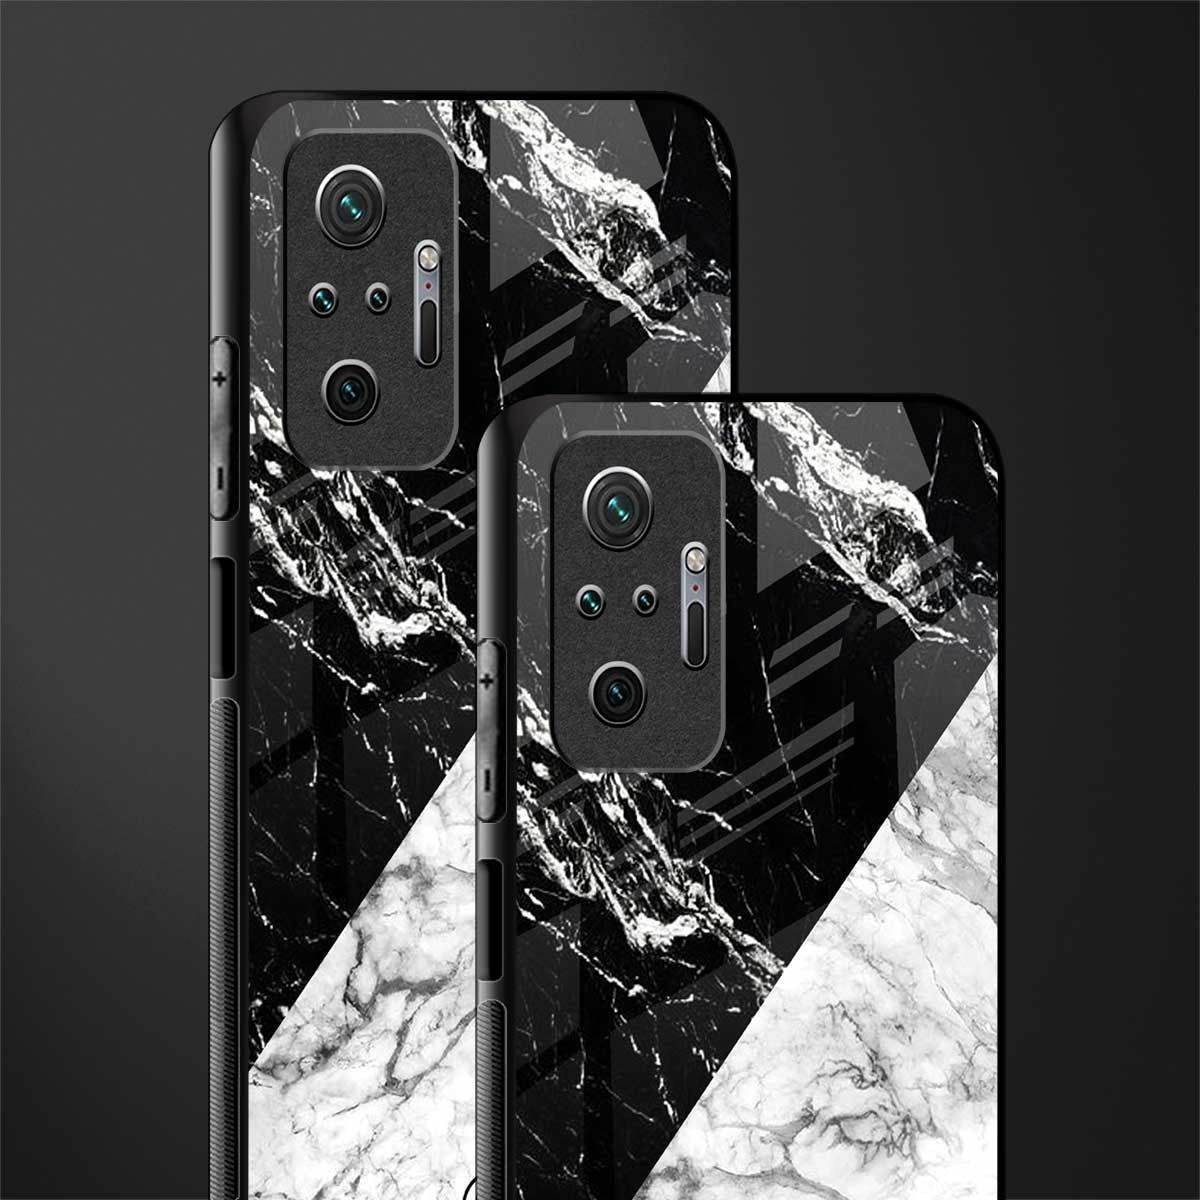 fatal contradiction phone cover for redmi note 10 pro max